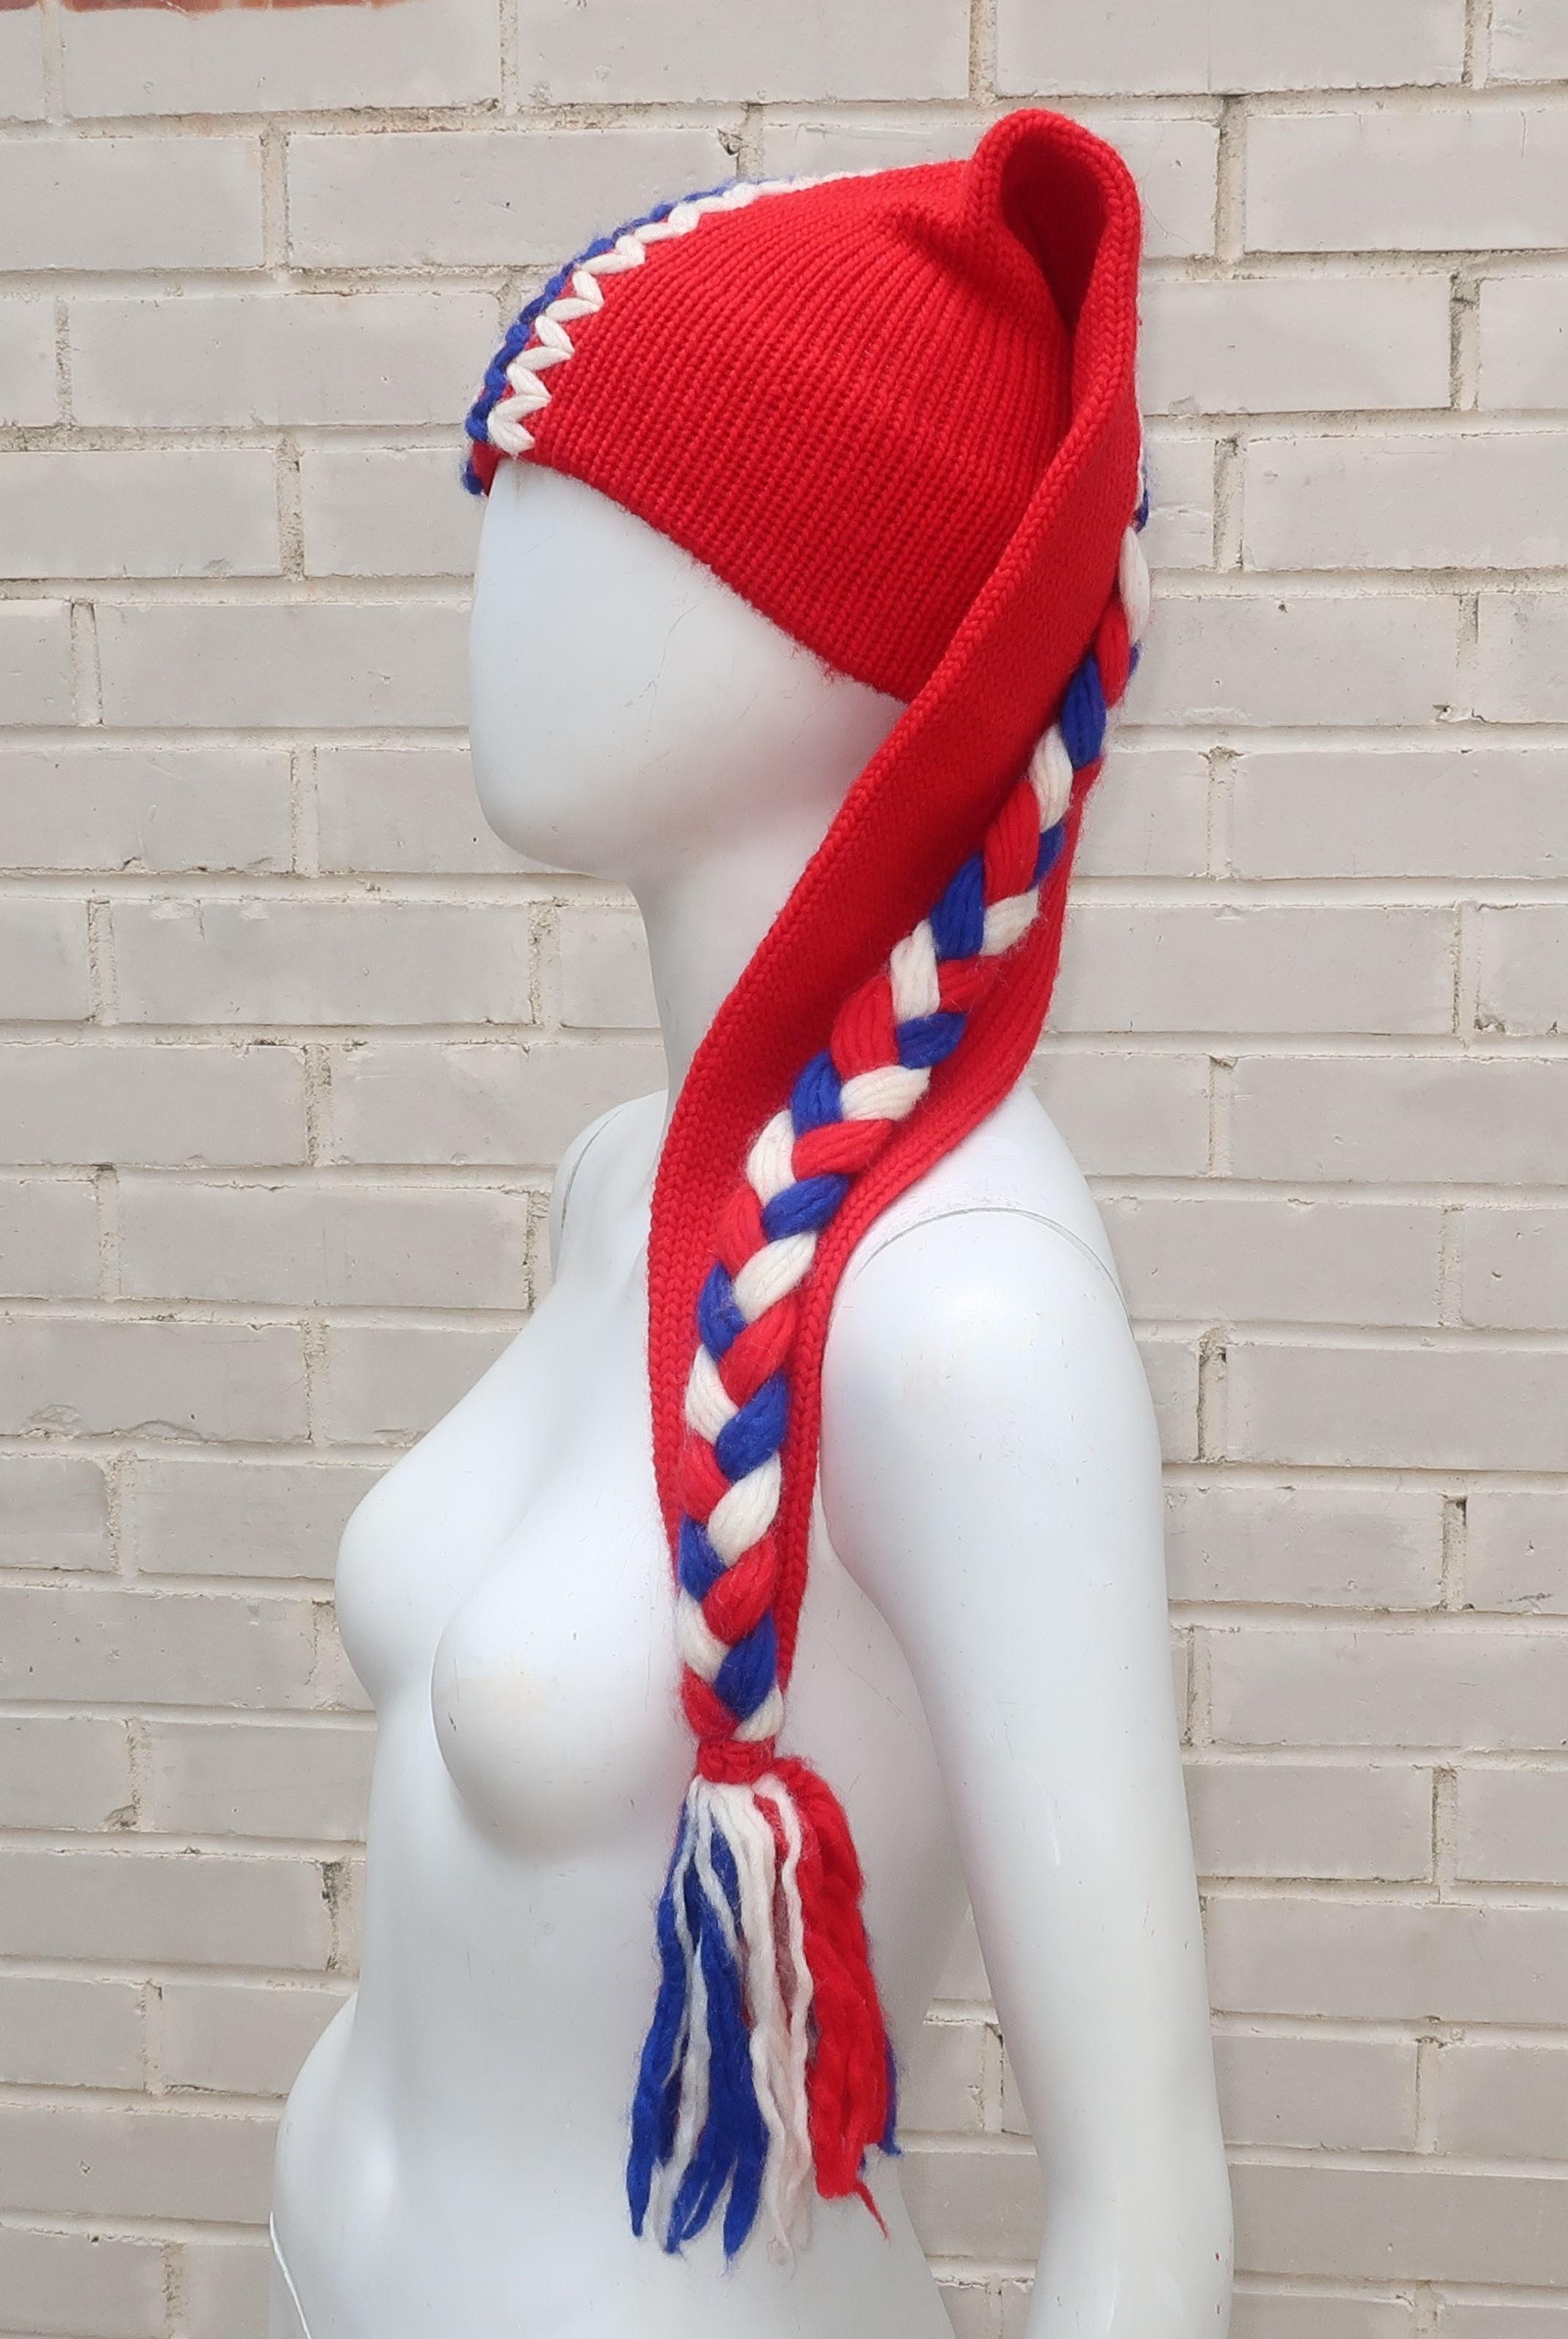 Adorable extra long stocking hat in red, white and blue wool with a braided accent and yarn tassel.  This topper is from the estate of a fashionable lady who started her career as a flight attendant in the 1950’s and spent her days off hitting the